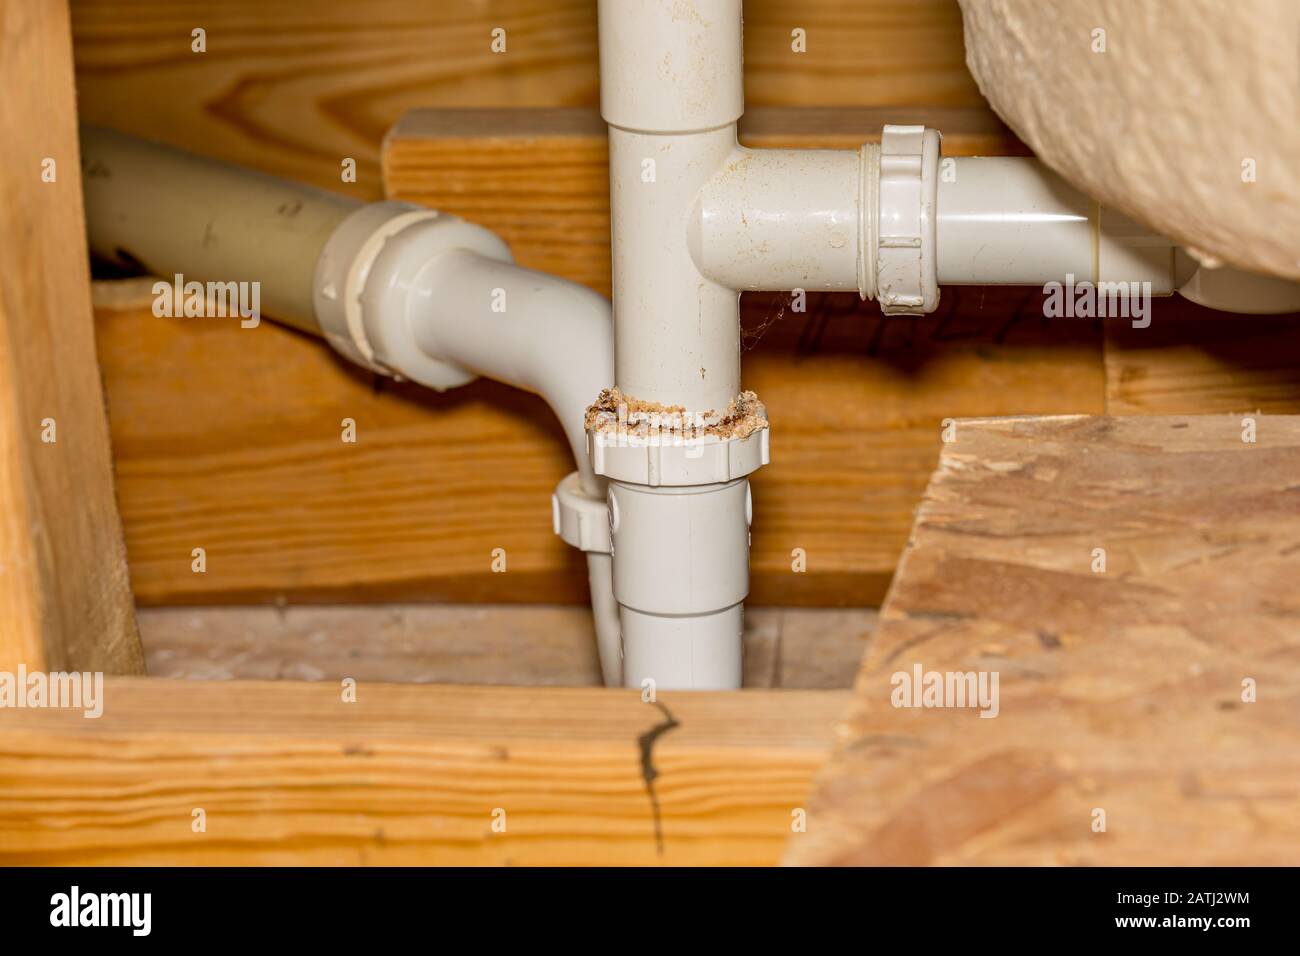 Old leaking plastic plumbing drain pipes under floor for bathroom tub and shower. Concept of DYI home maintenance, repair, remodeling Stock Photo